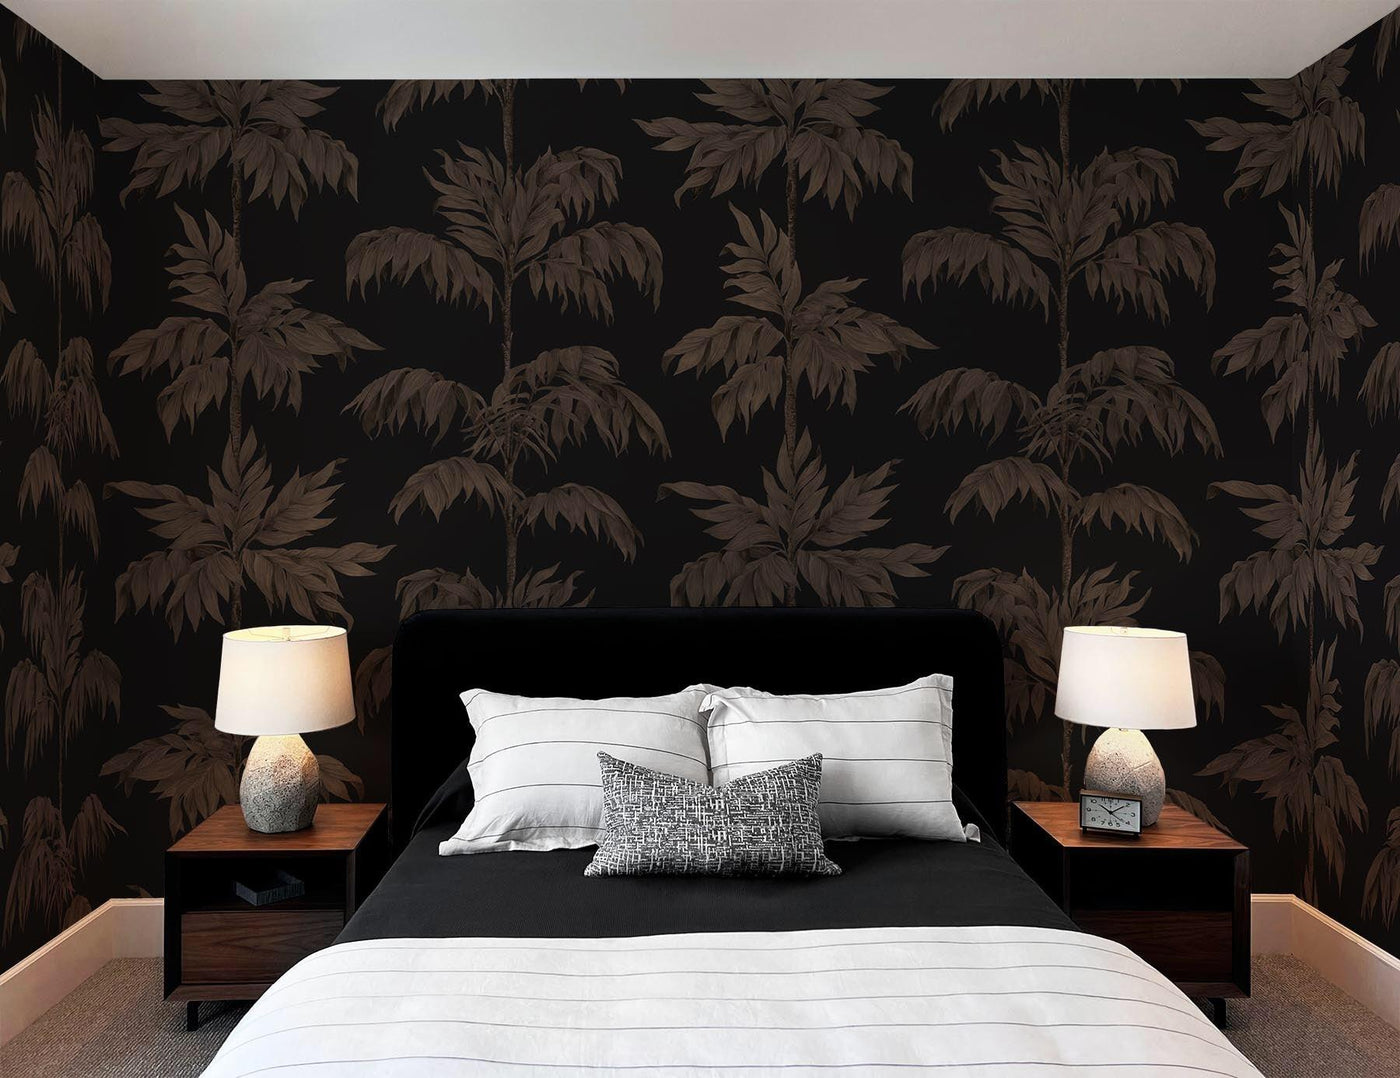 Brown wall murals for  your minimalstic interiror update. Dark wall murals for a moody interior update. Structured, floral och nature wall murals